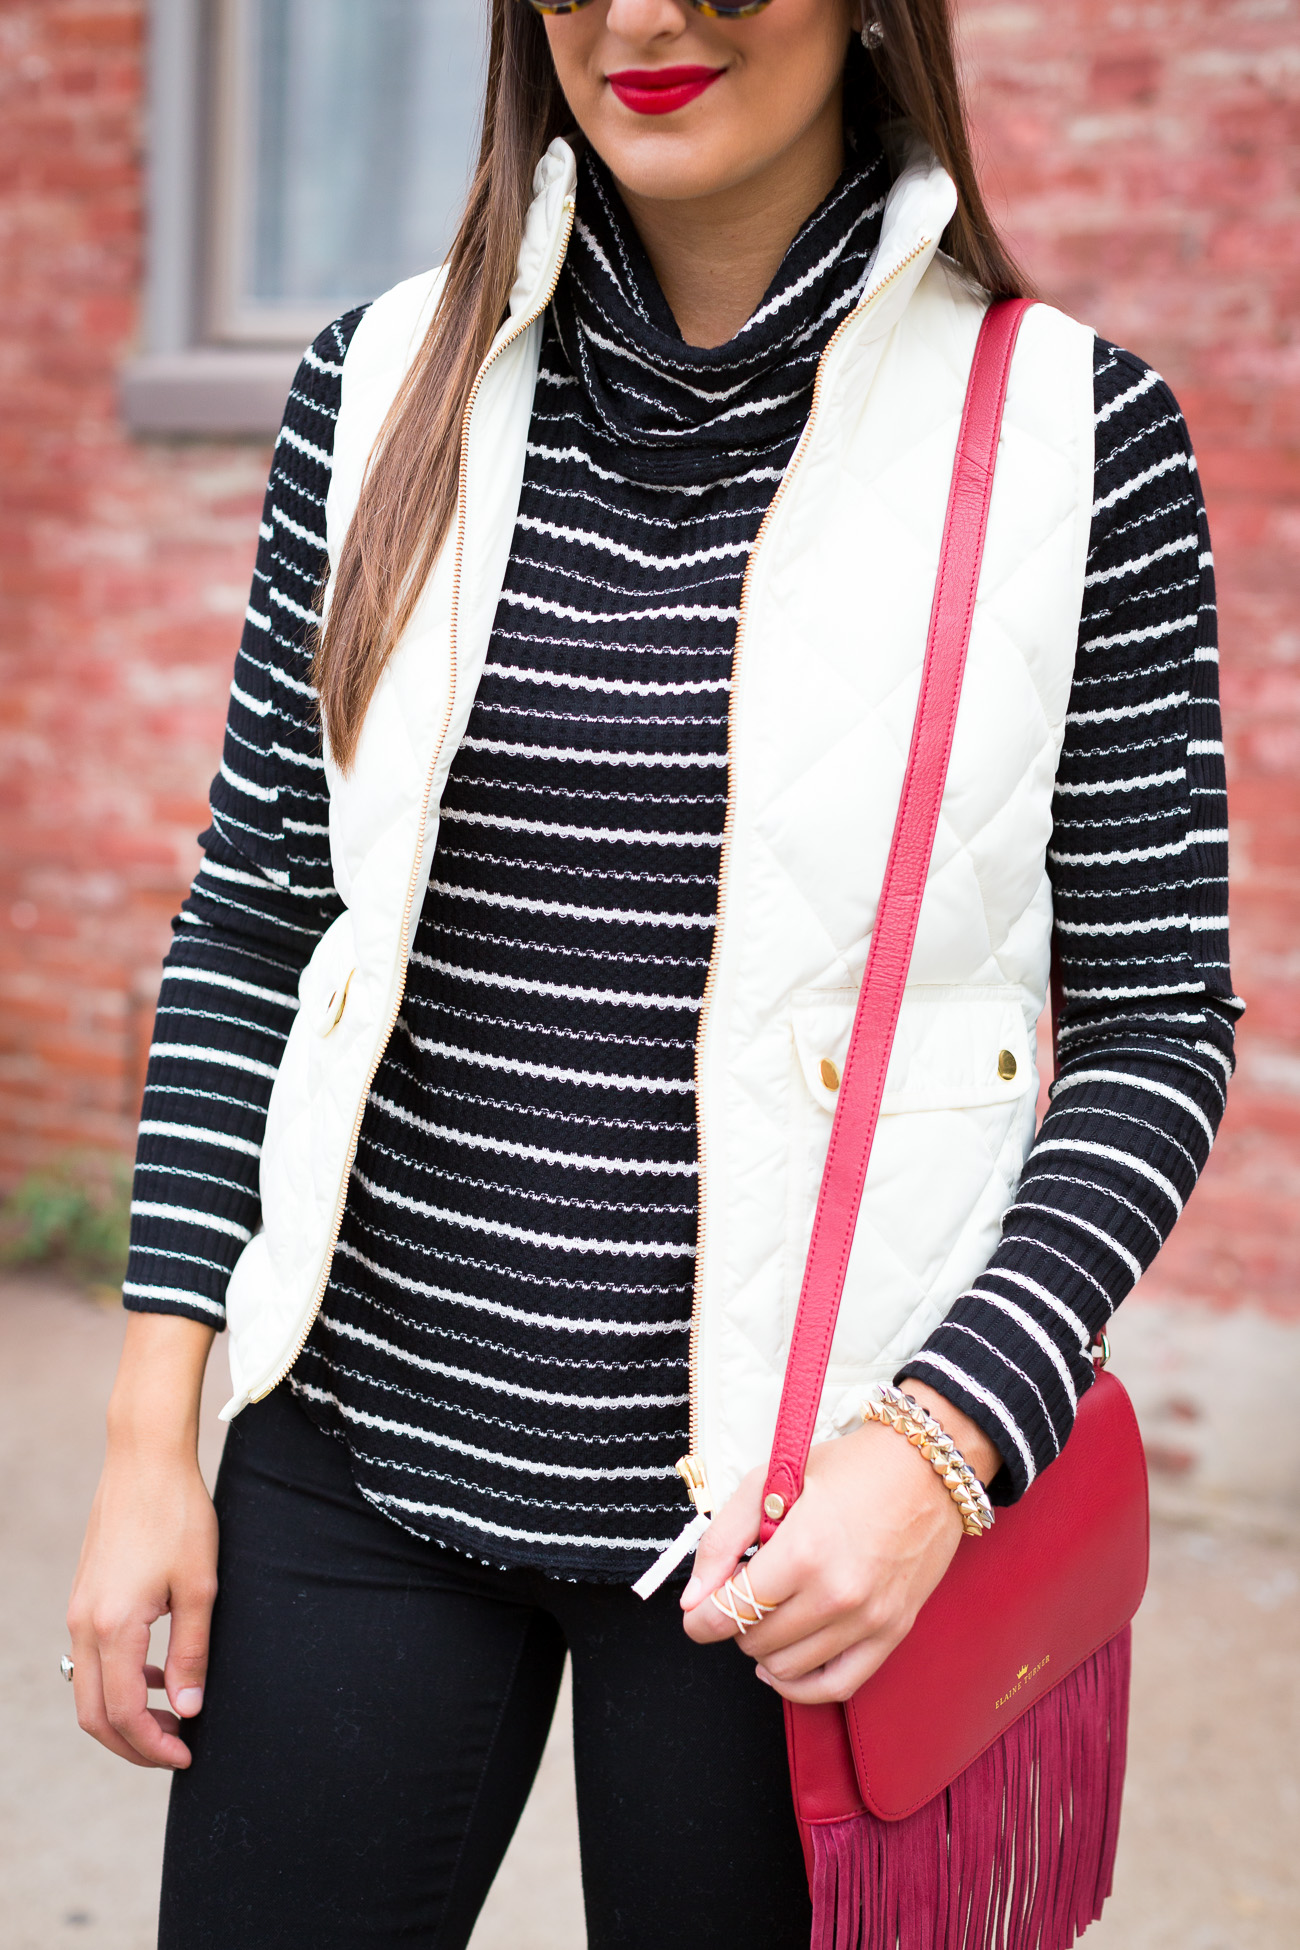 j.crew excursion vest, quilted puffer vest, stripe turtleneck, elaine turner crossbody, lace up booties, fall fashion and style, fringe crossbody bag // grace wainwright from a southern drawlj.crew excursion vest, quilted puffer vest, stripe turtleneck, elaine turner crossbody, lace up booties, fall fashion and style // grace wainwright from a southern drawl